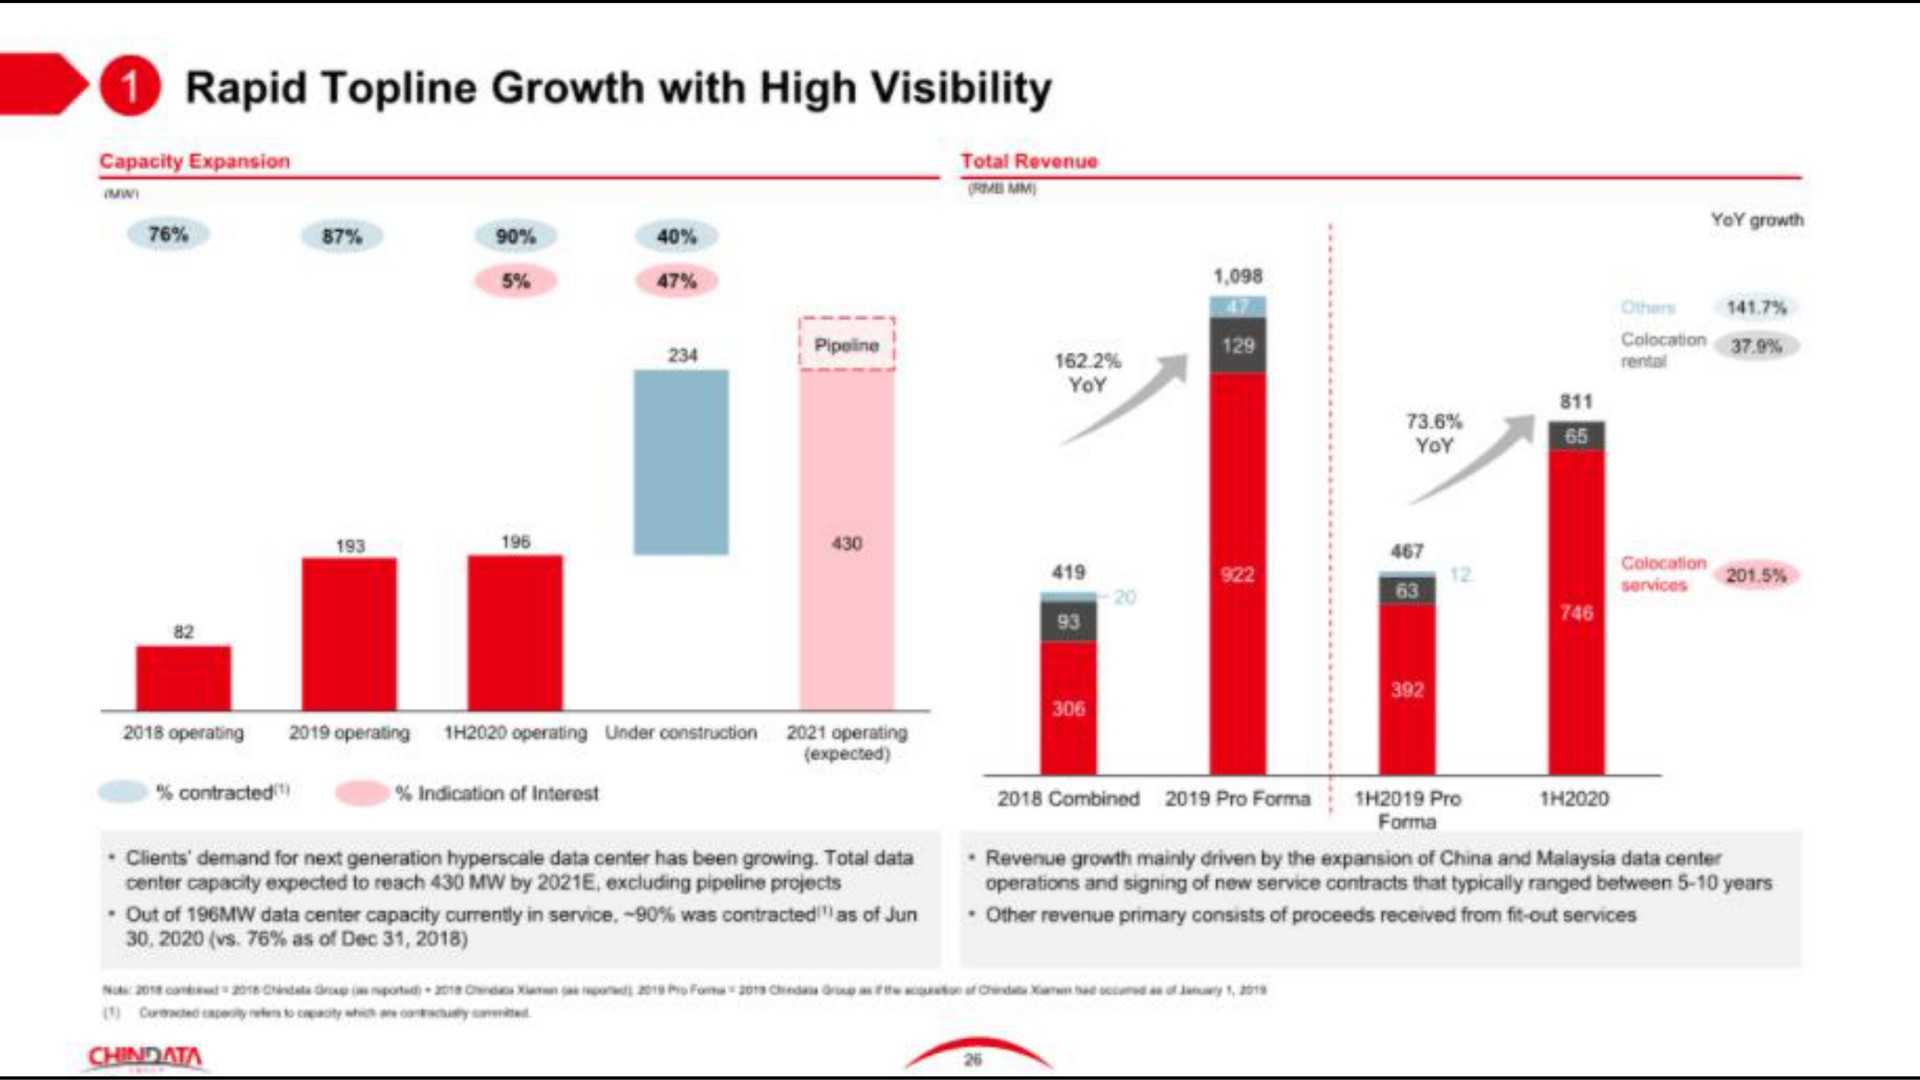 rapid topline growth with high visibility | Chindata Group